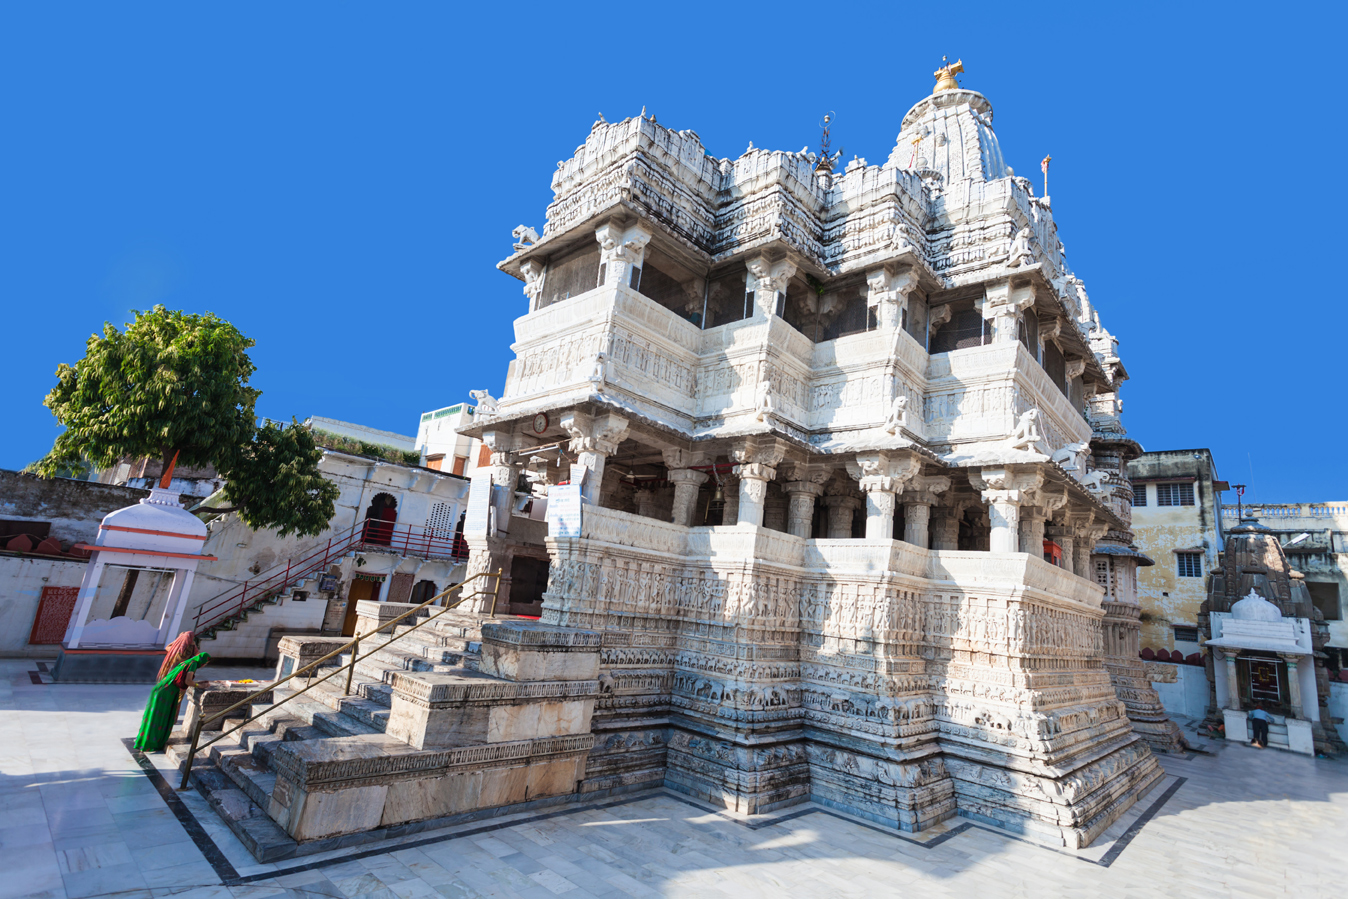 Jagdish Temple is a large Hindu temple in Udaipur